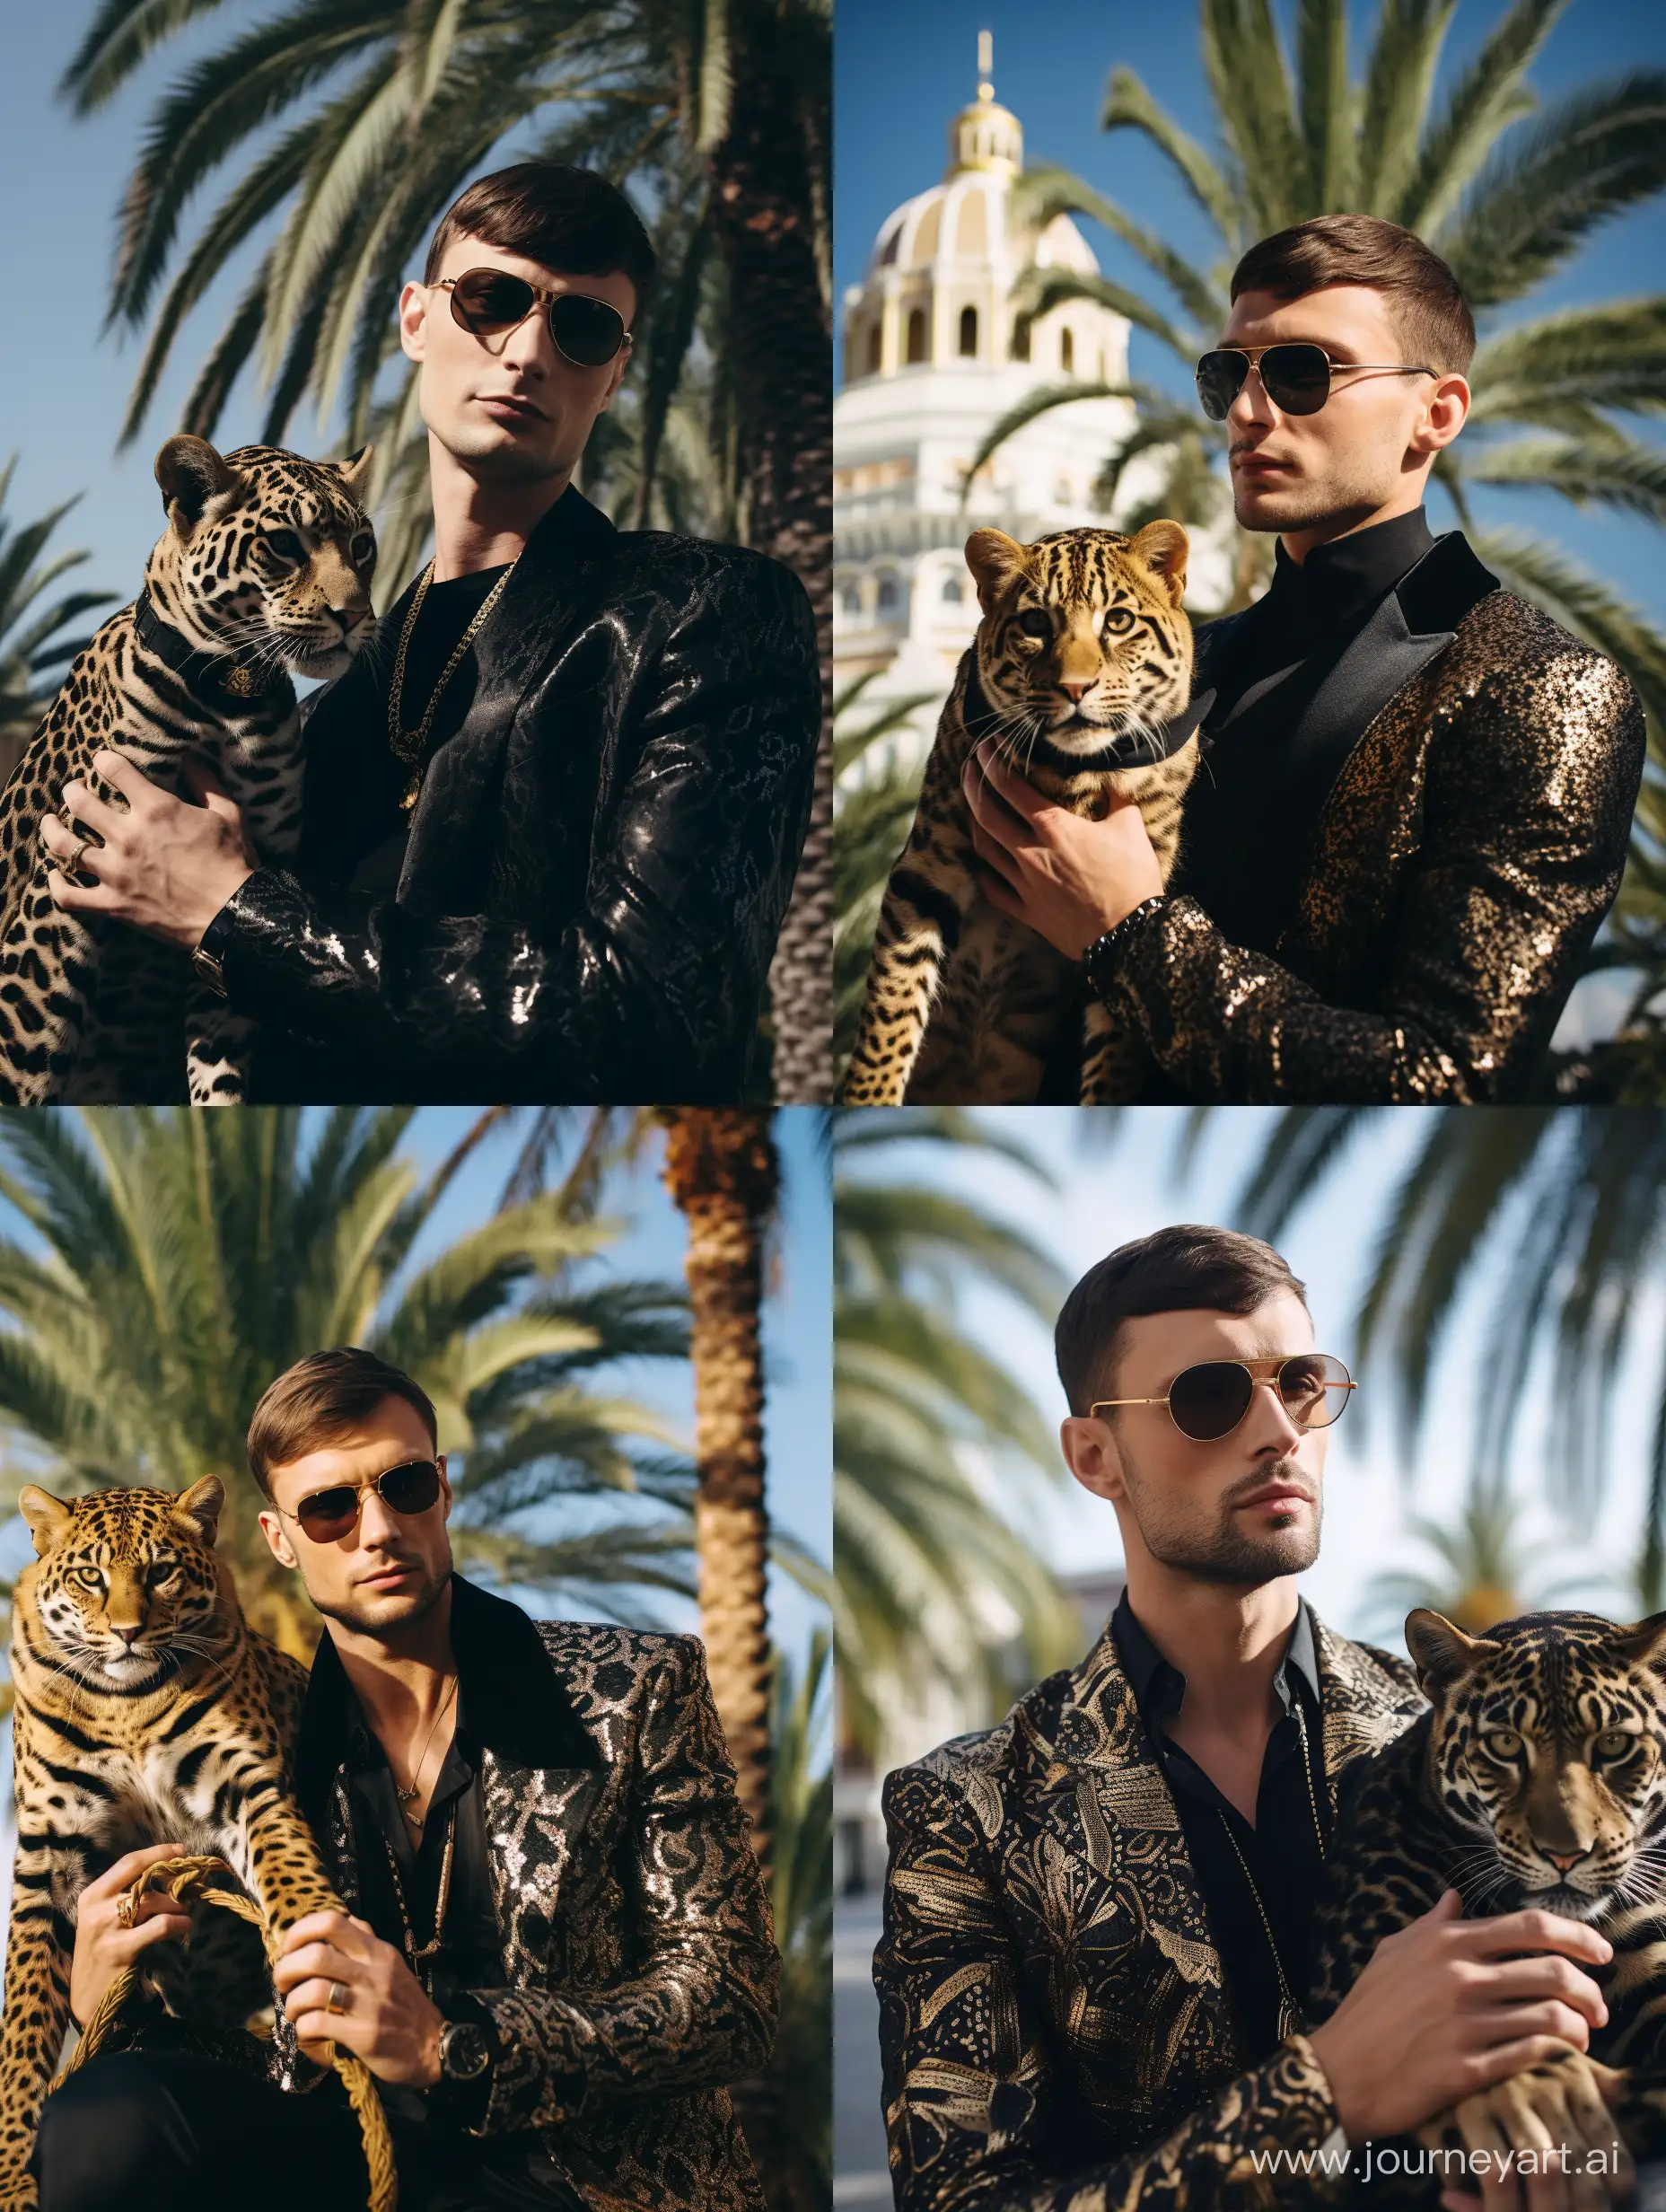 Stylish-Russian-Man-in-Leopard-Suit-with-Black-Panther-Monaco-Mansion-Aesthetics